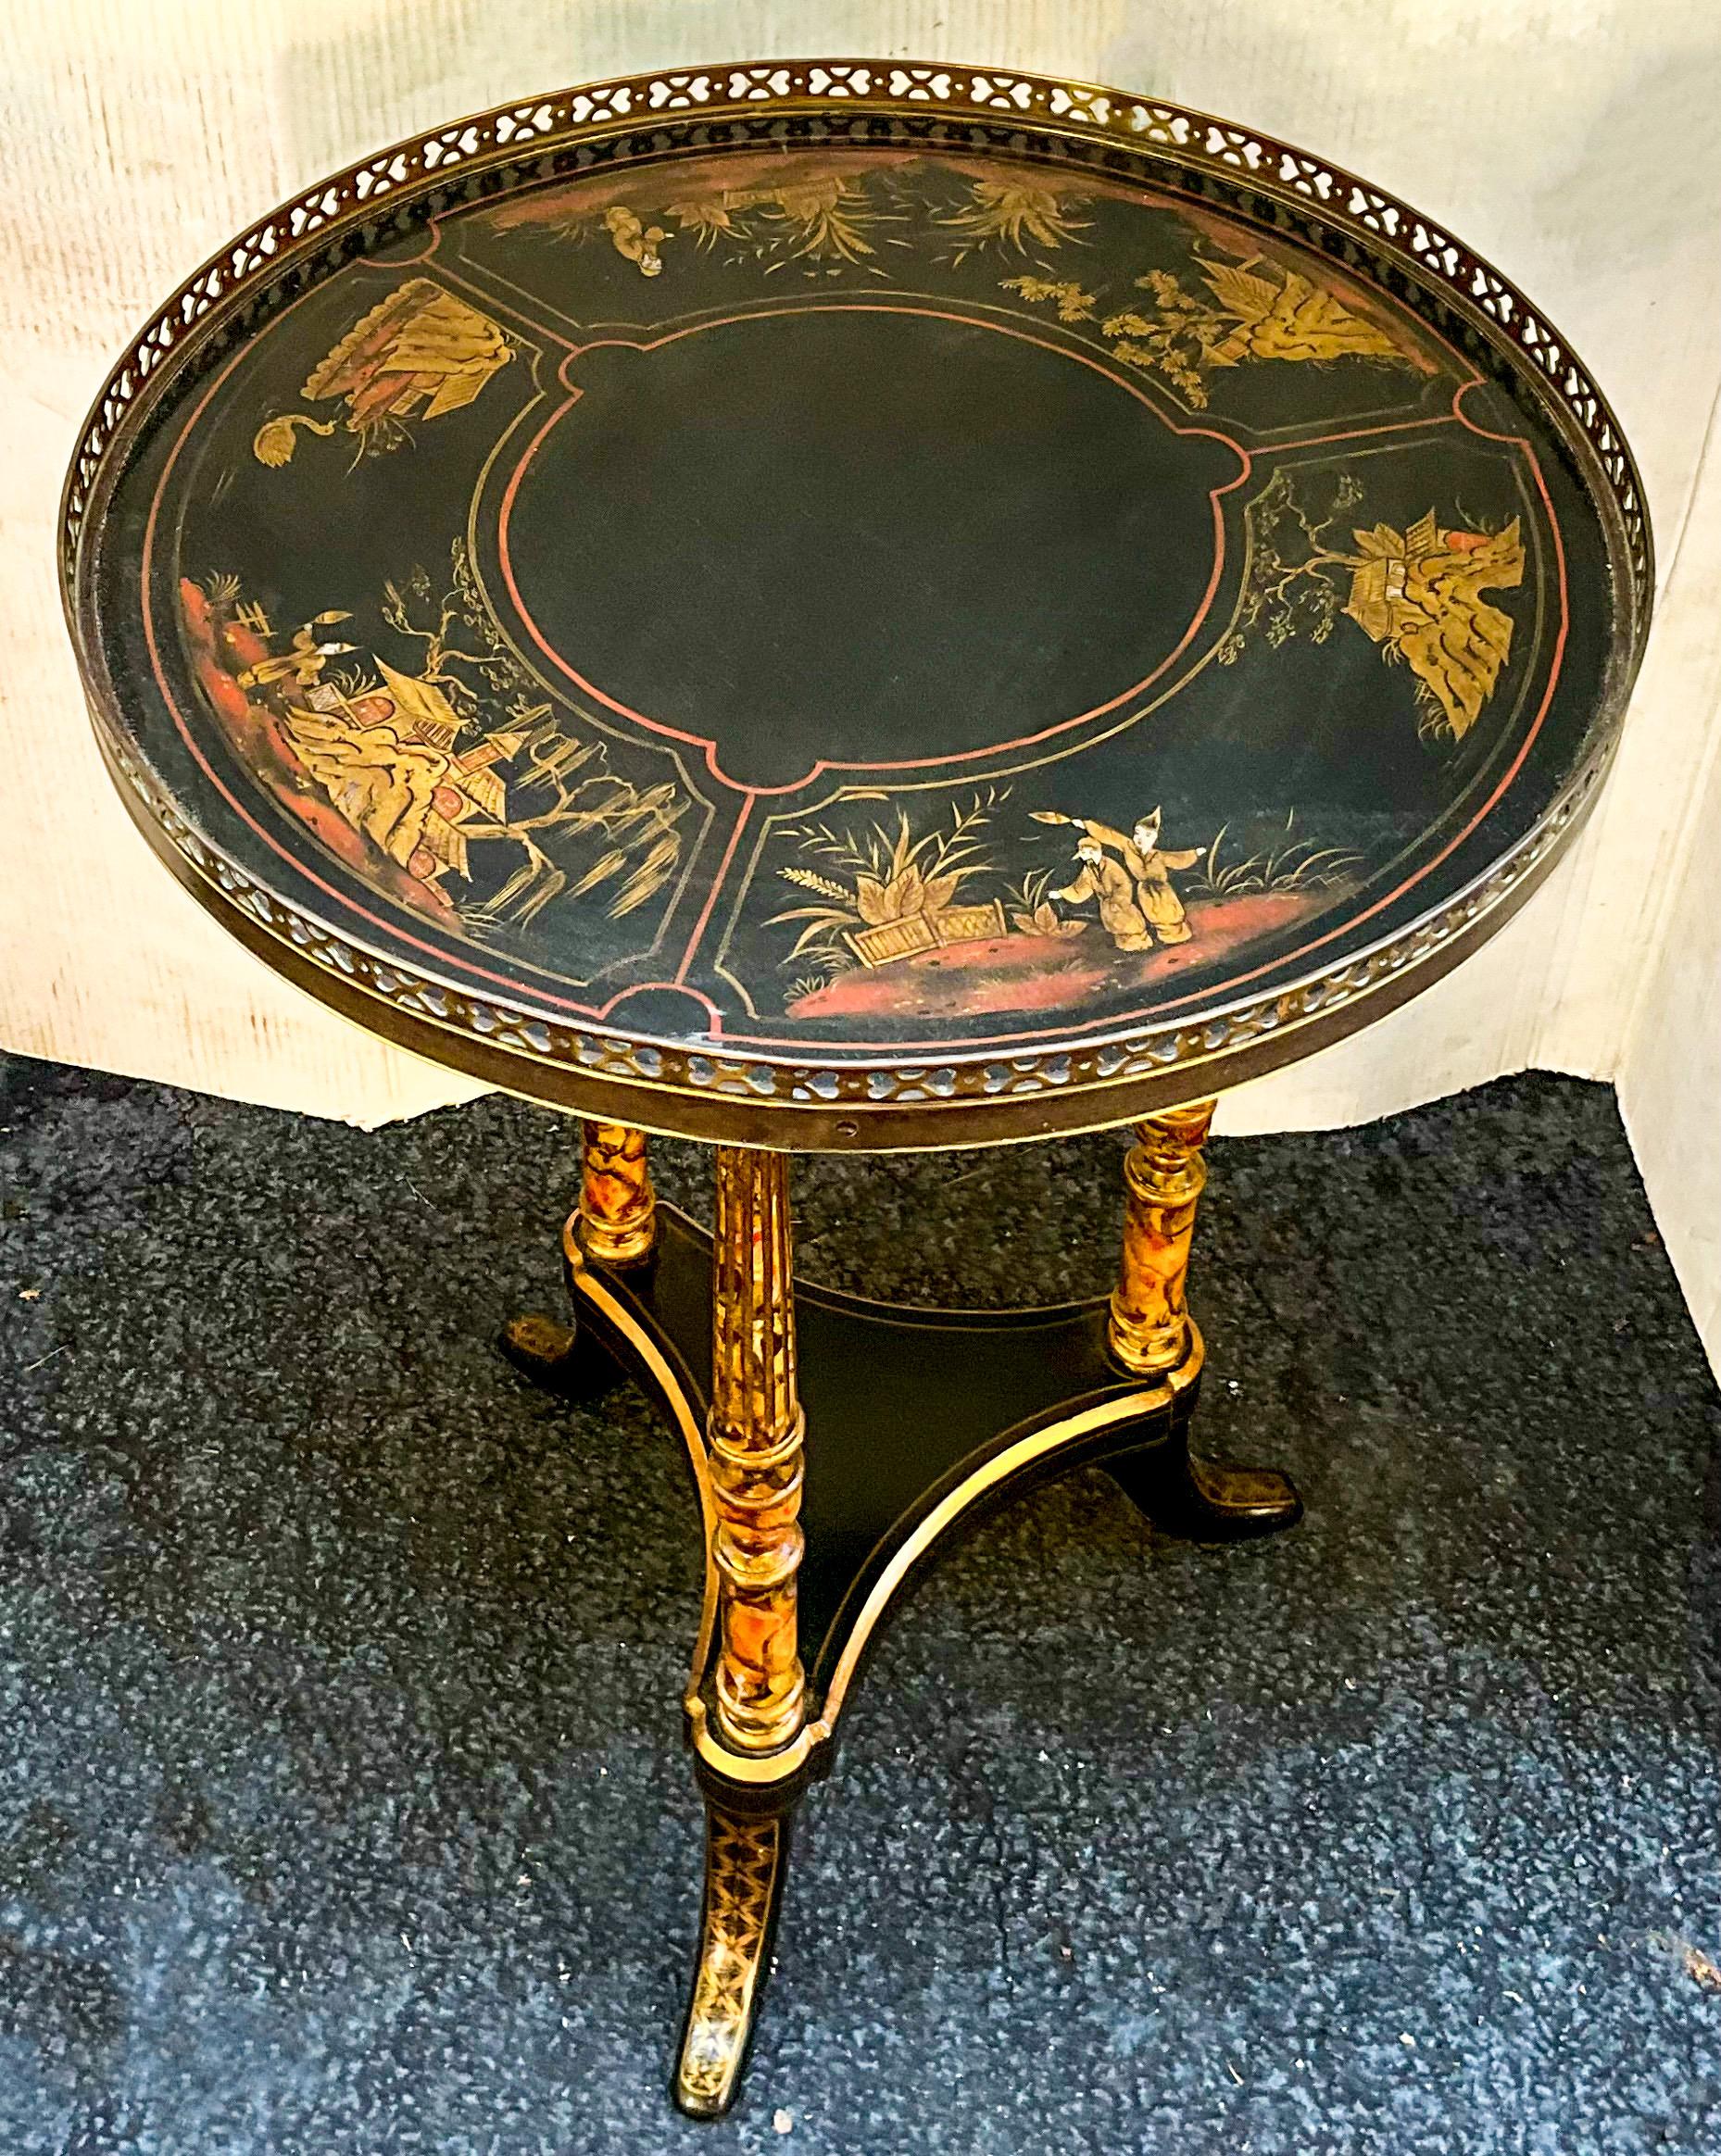 This side table checks all the boxes! It is a lovely drinks table with painted chinoiserie top surrounded by a brass gallery. The tripod legs are wood and have been hand painted faux marbleized finish. The base is black lacquer with gilt accents. It